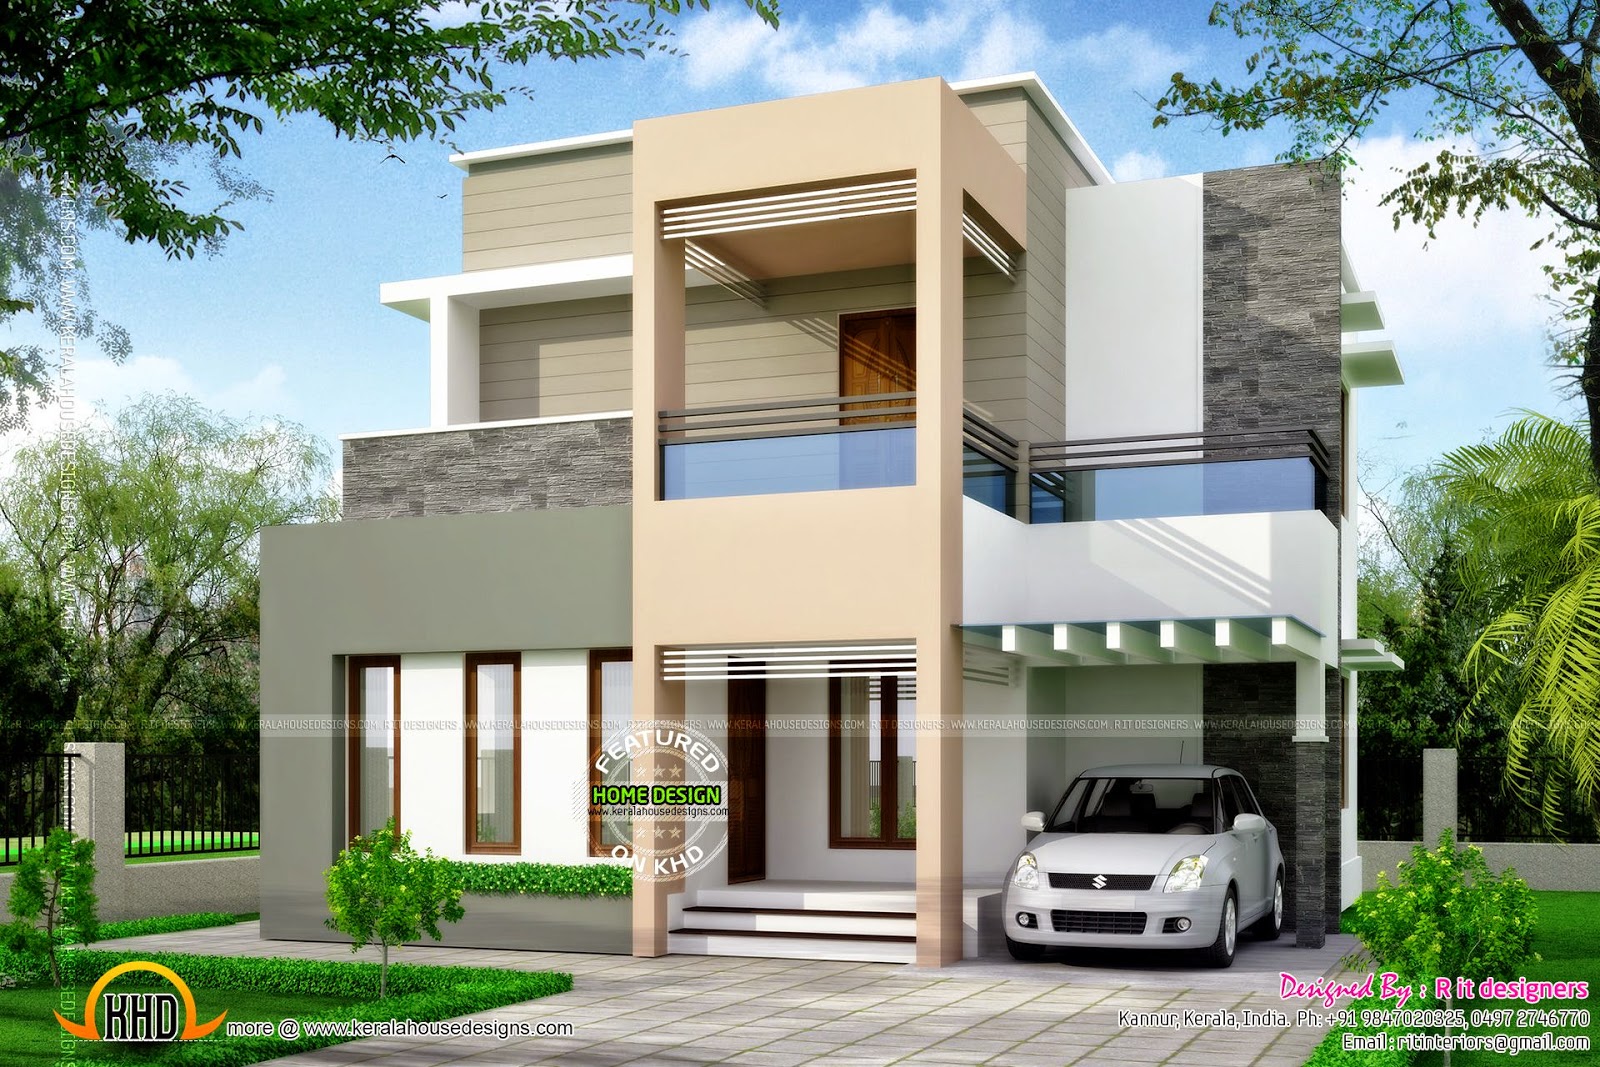 Clean box type house exterior Kerala home design and